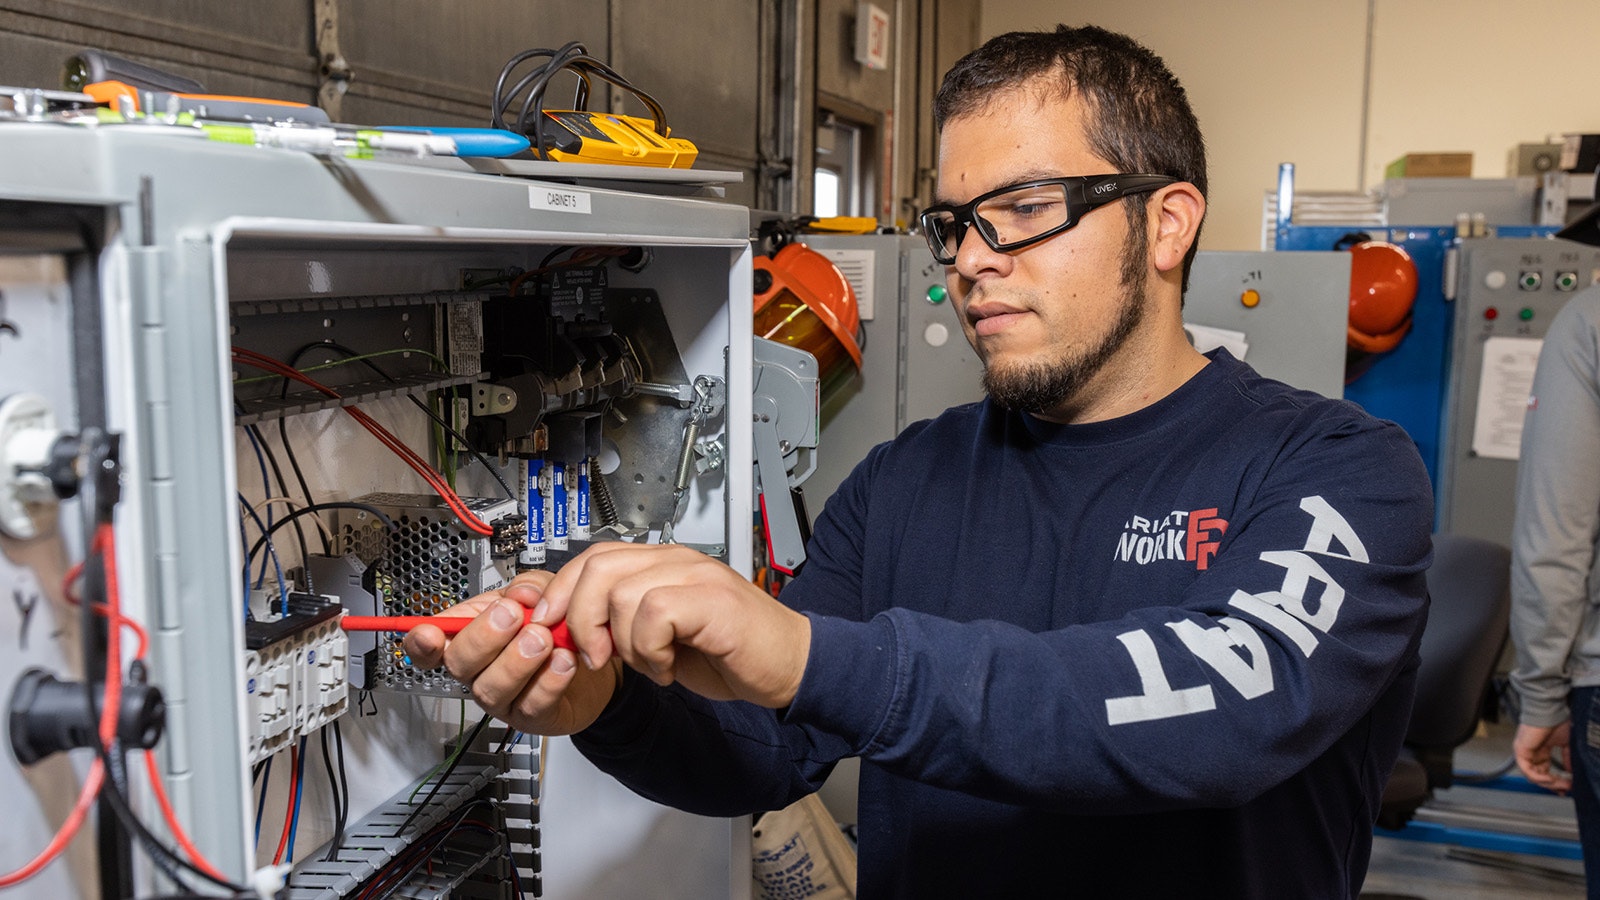 Aryah Ybarra works on his capstone project, which is an electrical circuit he built. H\is instructor will introduce faults into it for him to fix.